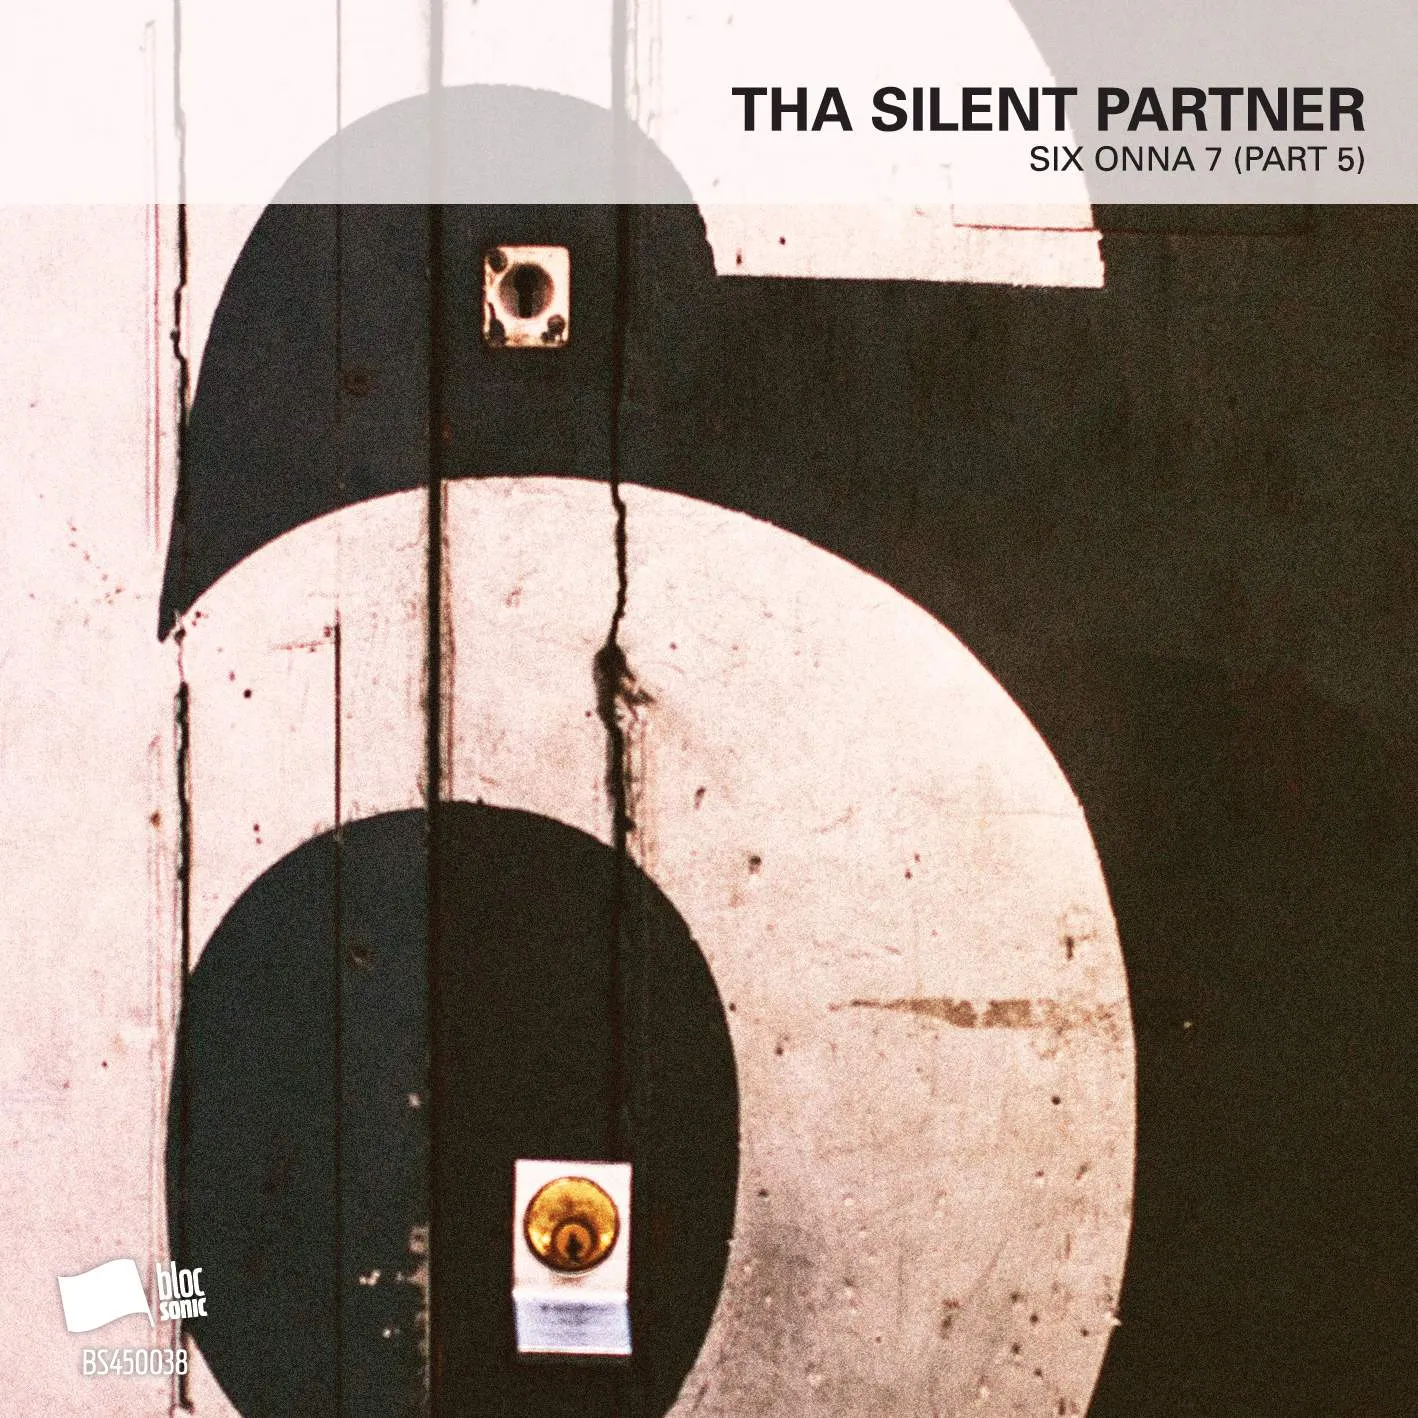 Album cover for “SIX ONNA 7 (Part 5)” by Tha Silent Partner